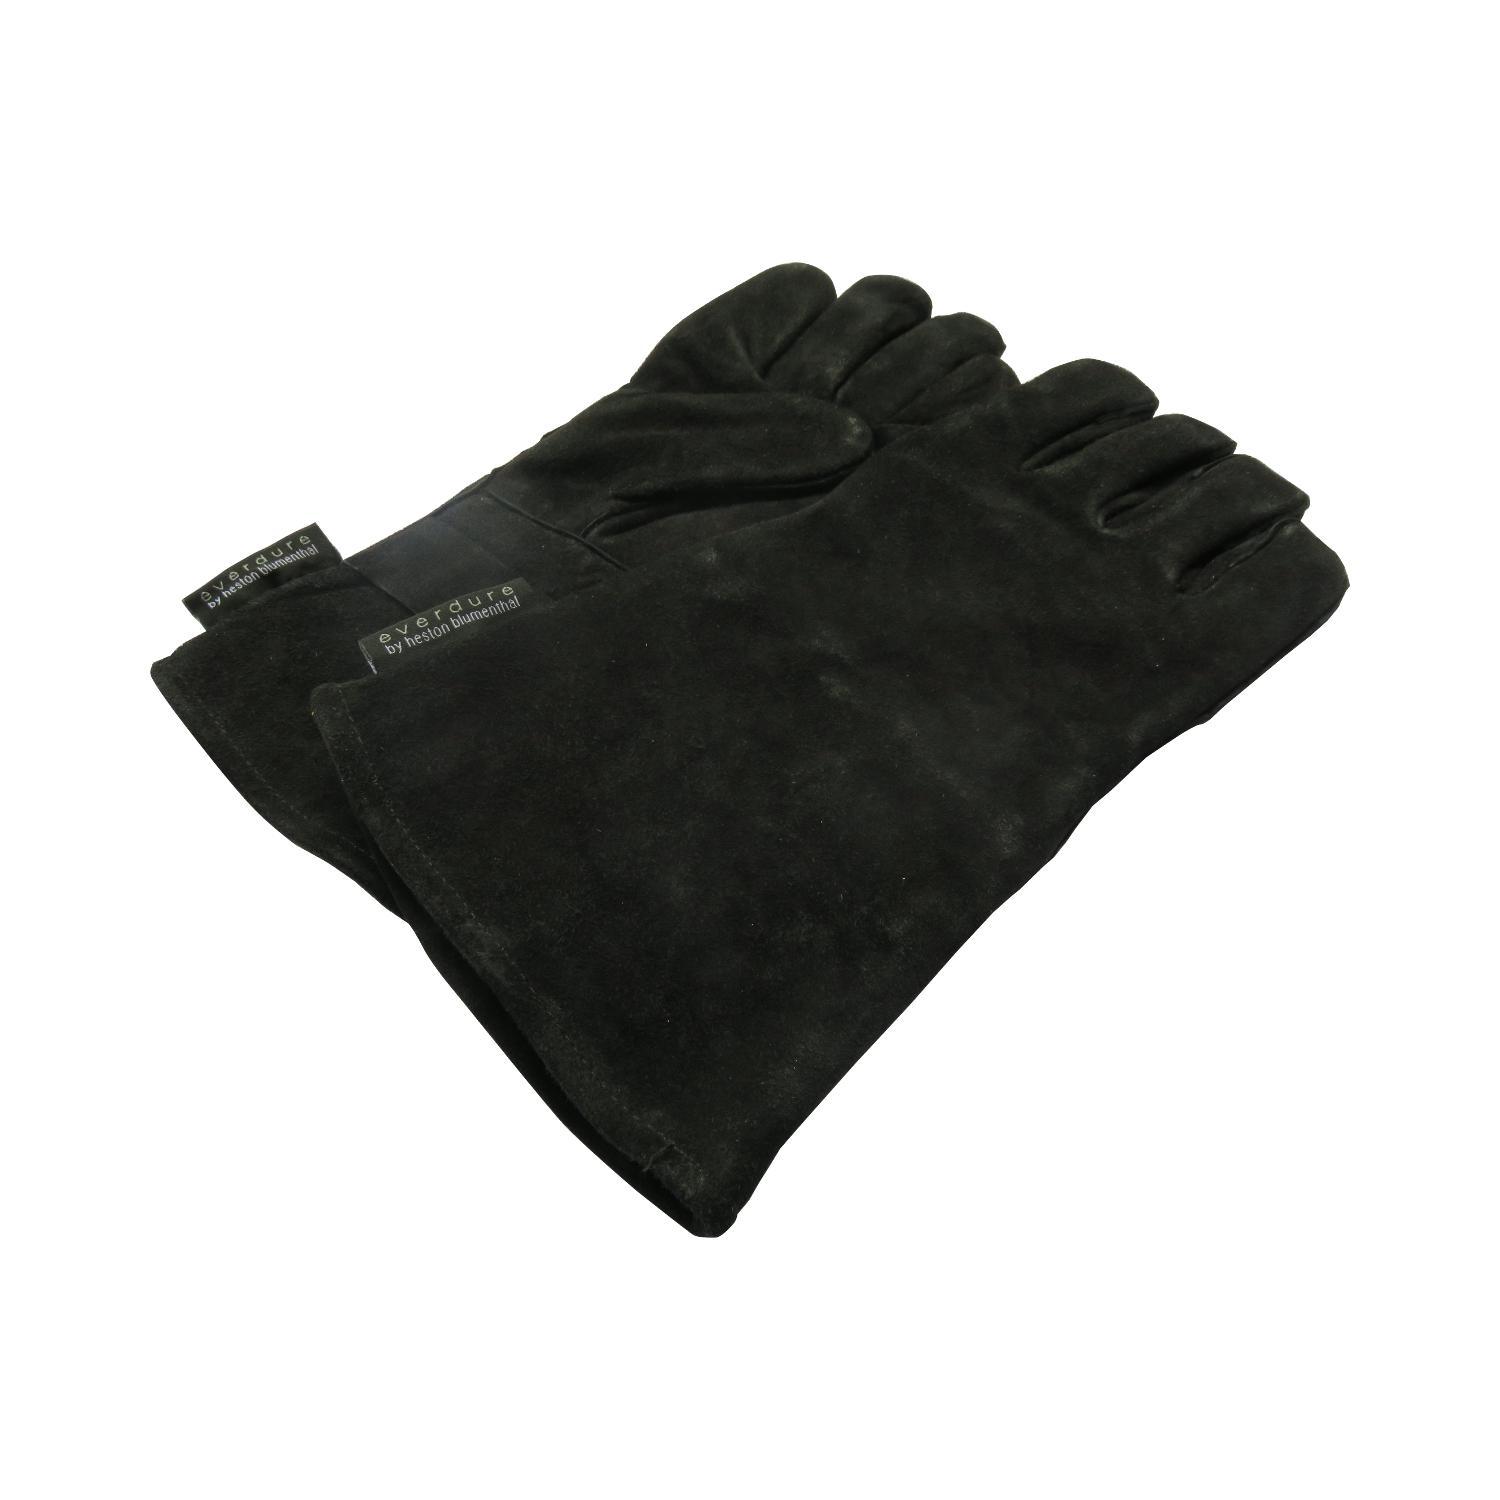 Everdure Safety and Cleaning Everdure By Heston Blumenthal Leather Grilling Gloves - Small/Medium